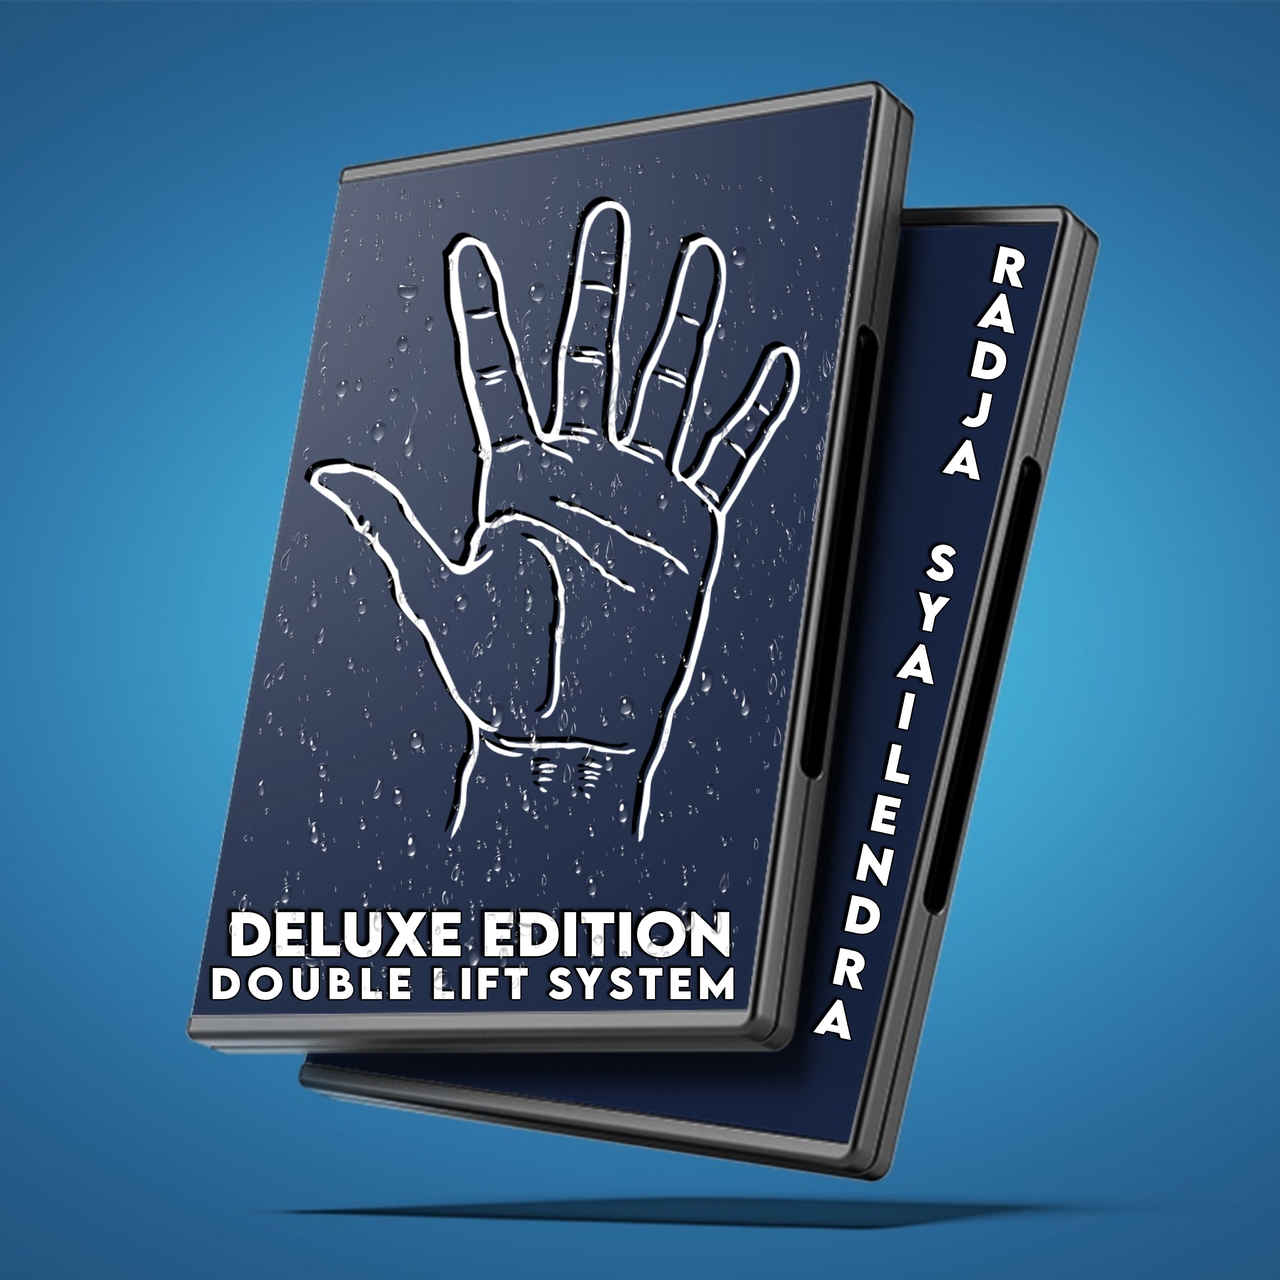 Double Lift System Deluxe Edition by Radja Syailendra (Mp4 Video Download)